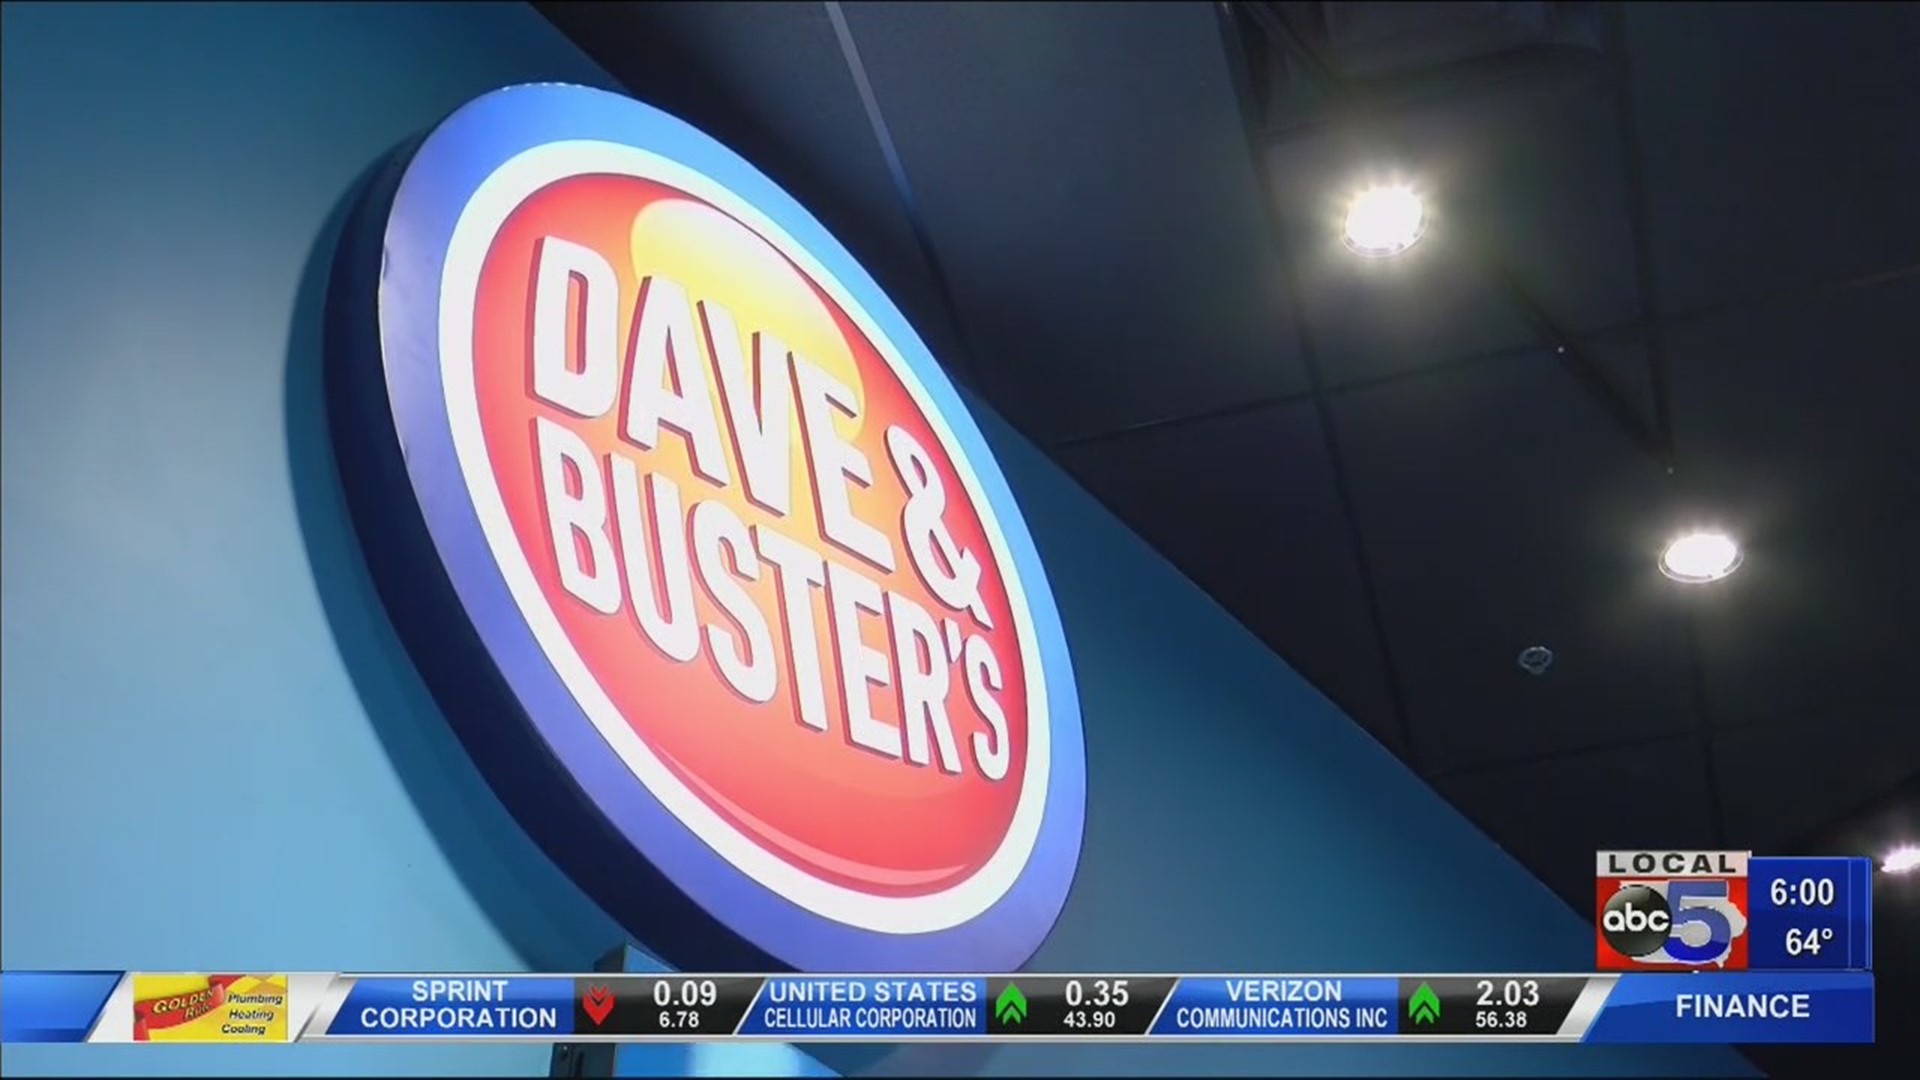 Dave & Buster's taking over old Younkers space